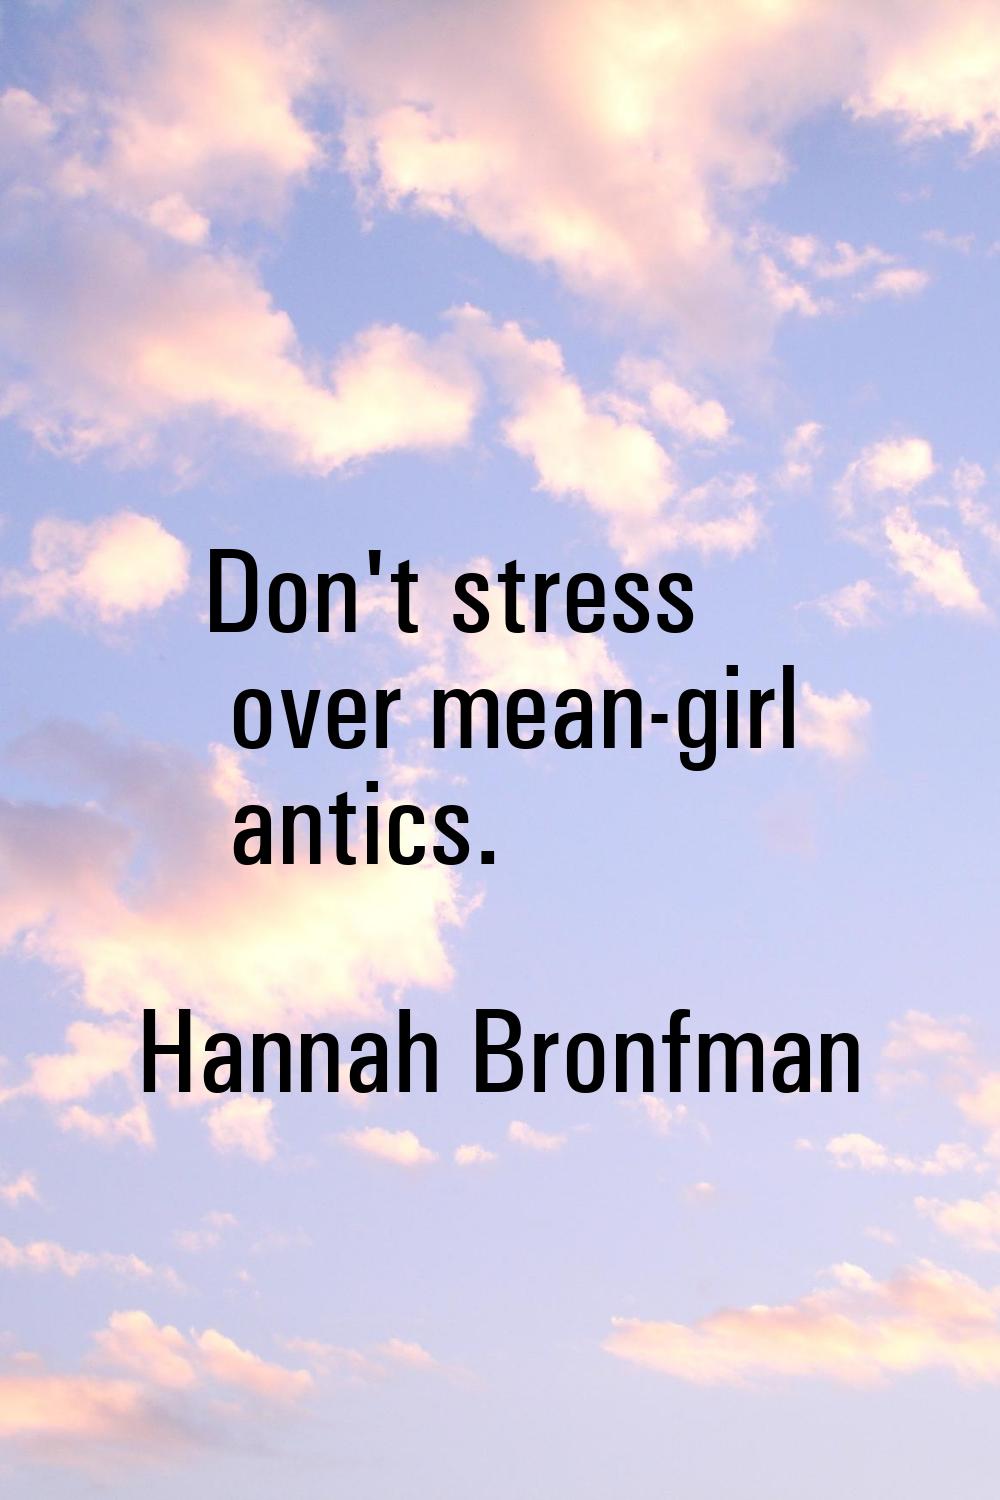 Don't stress over mean-girl antics.